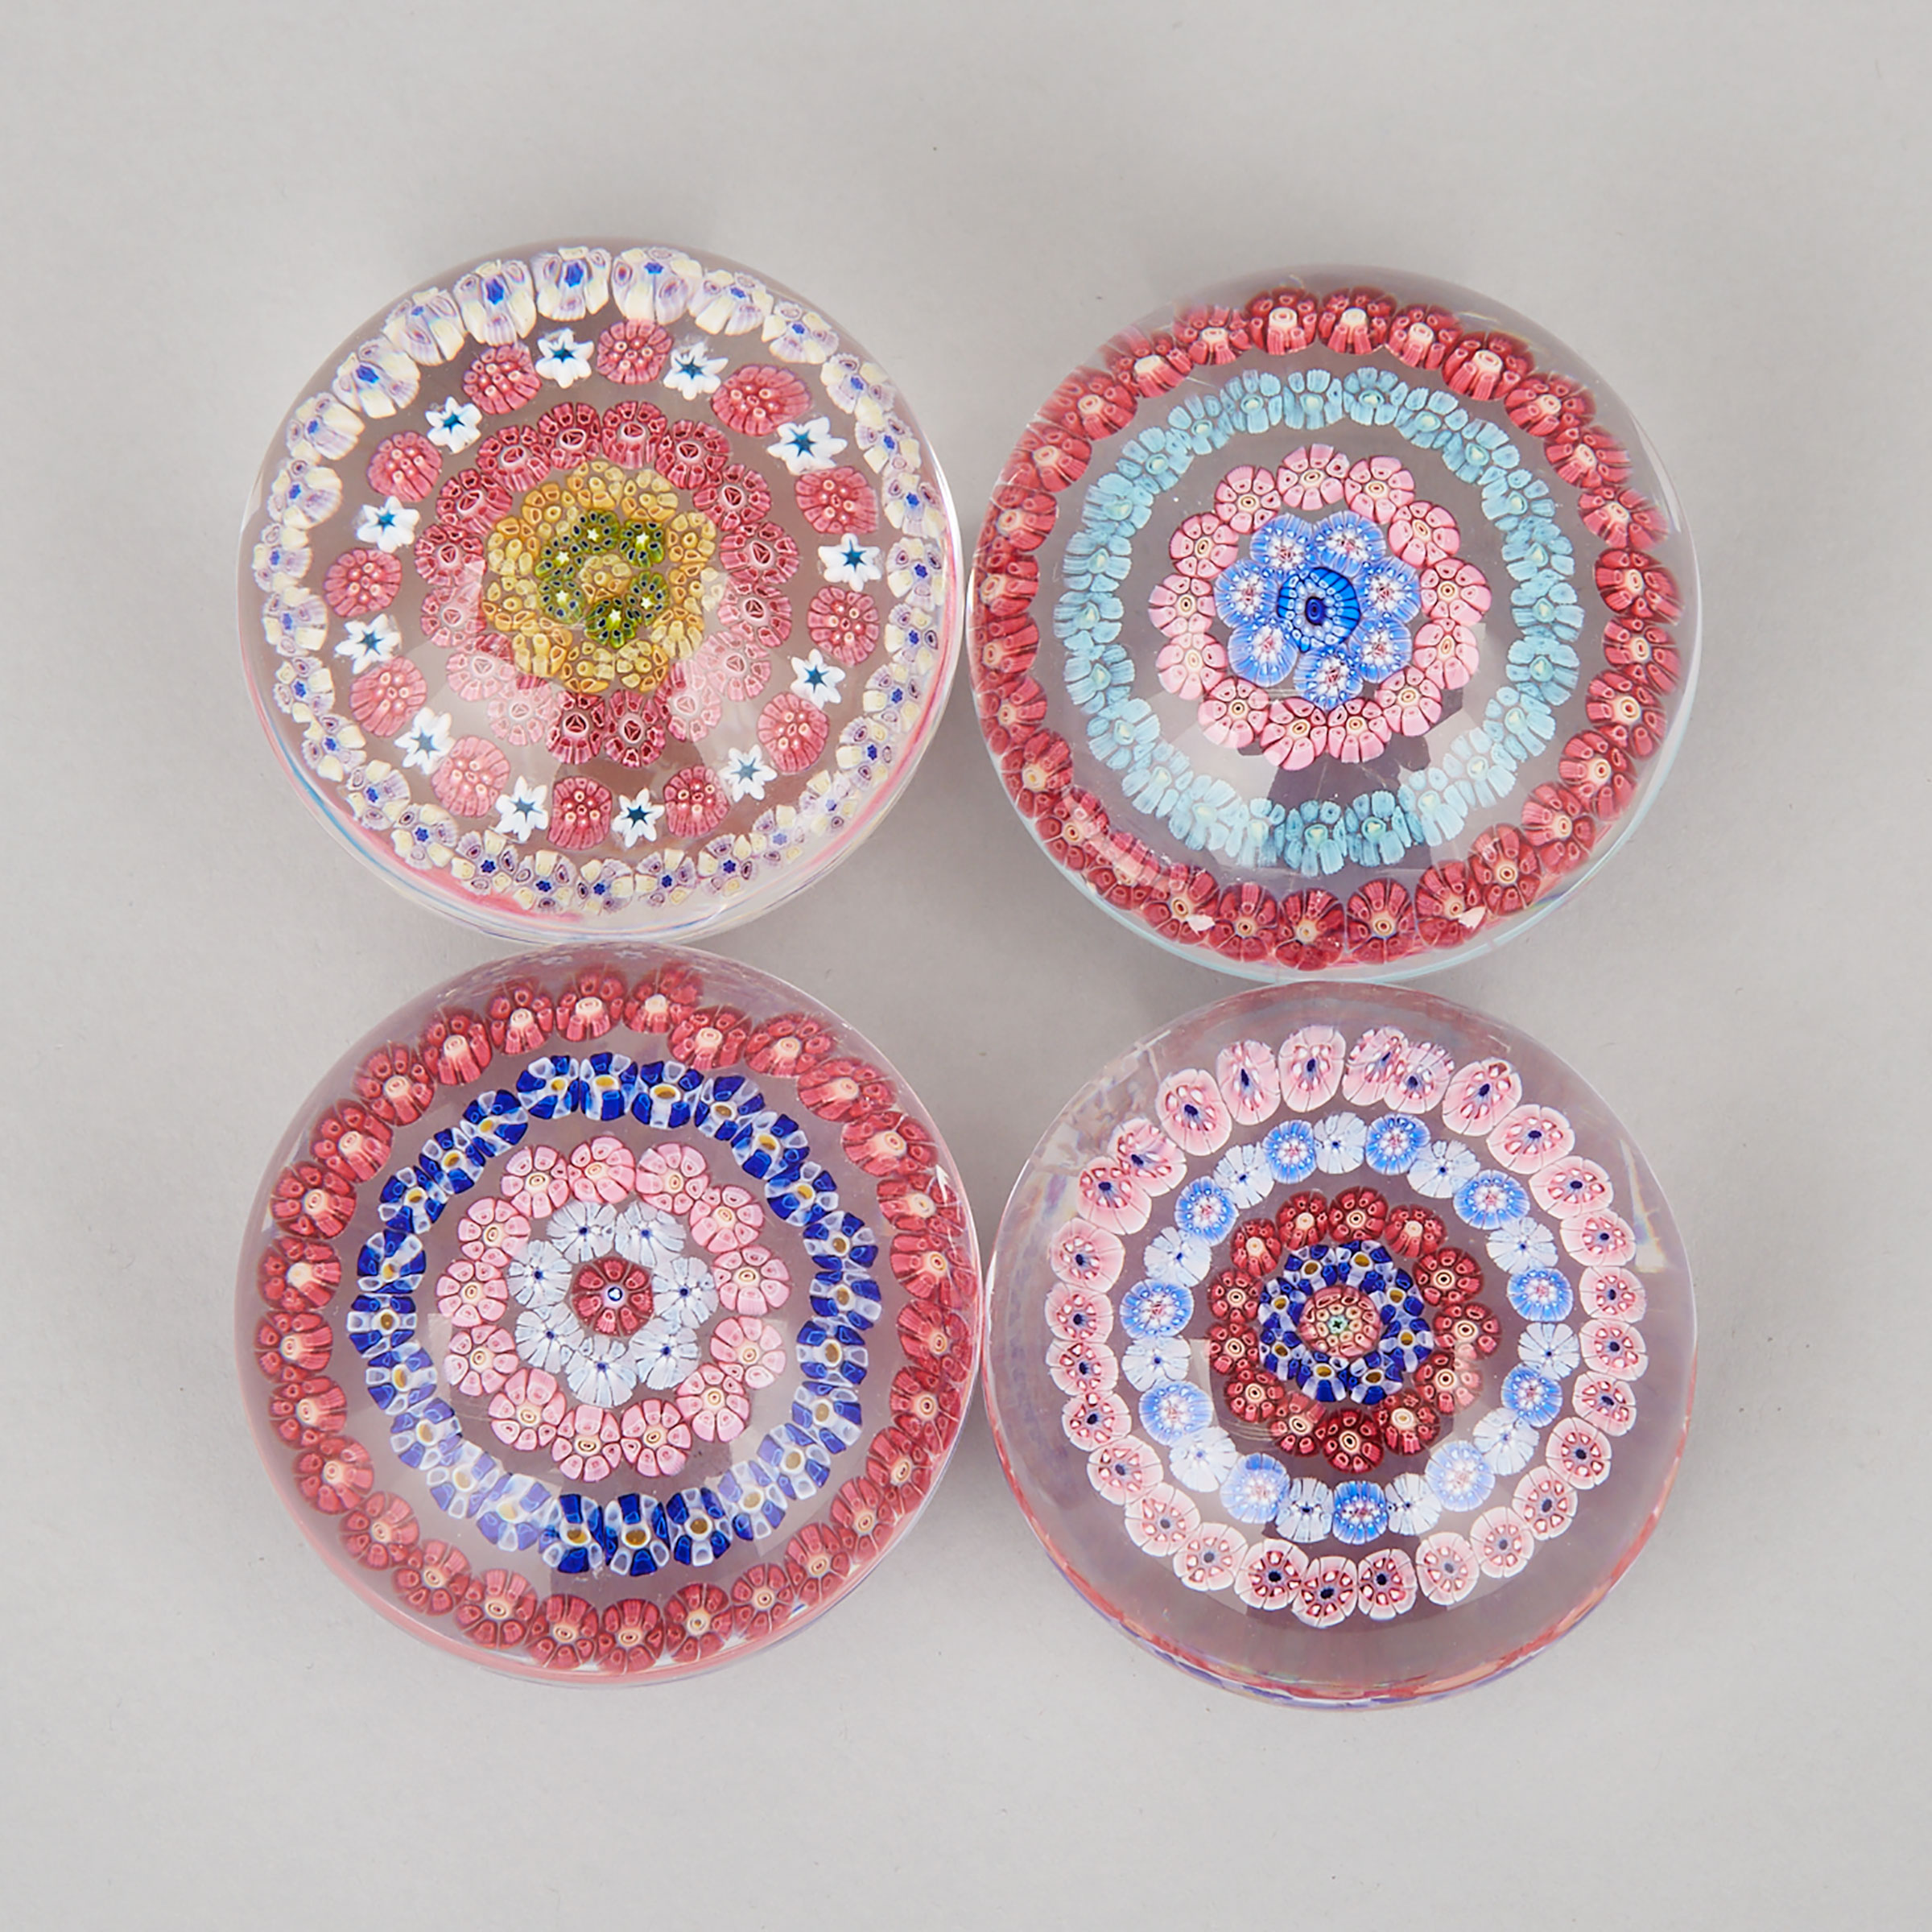 Four Concentric Millefiori Glass Paperweights, 20th century